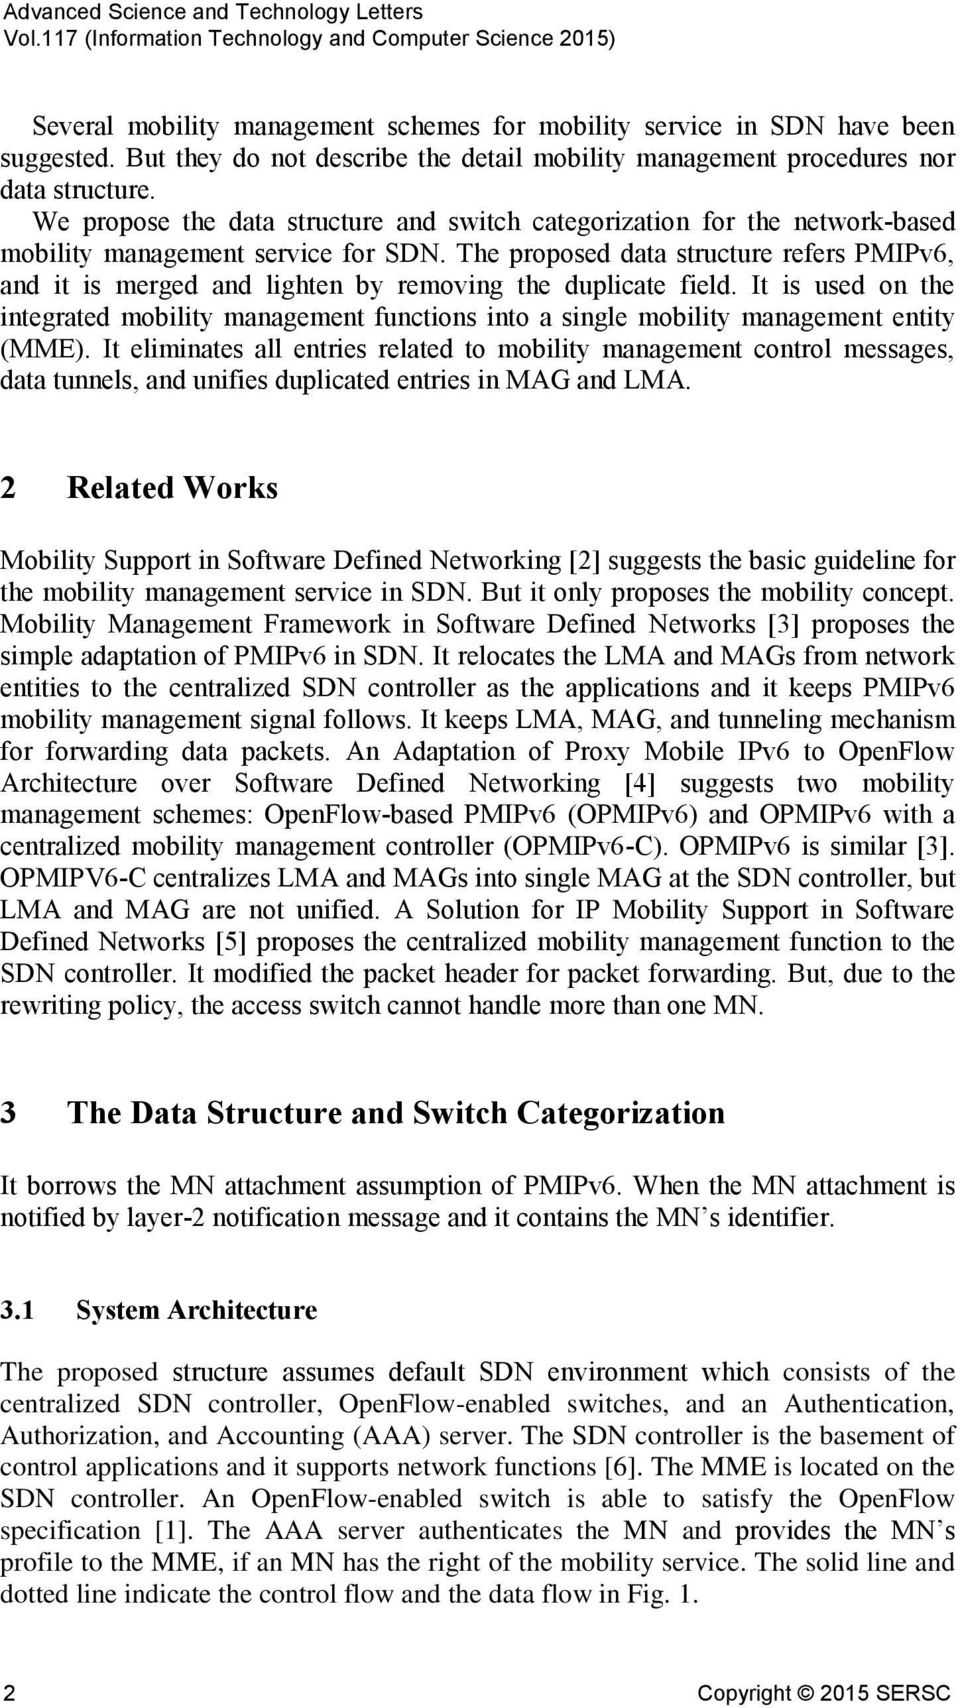 We propose the data structure and switch categorization for the network-based mobility management service for SDN.